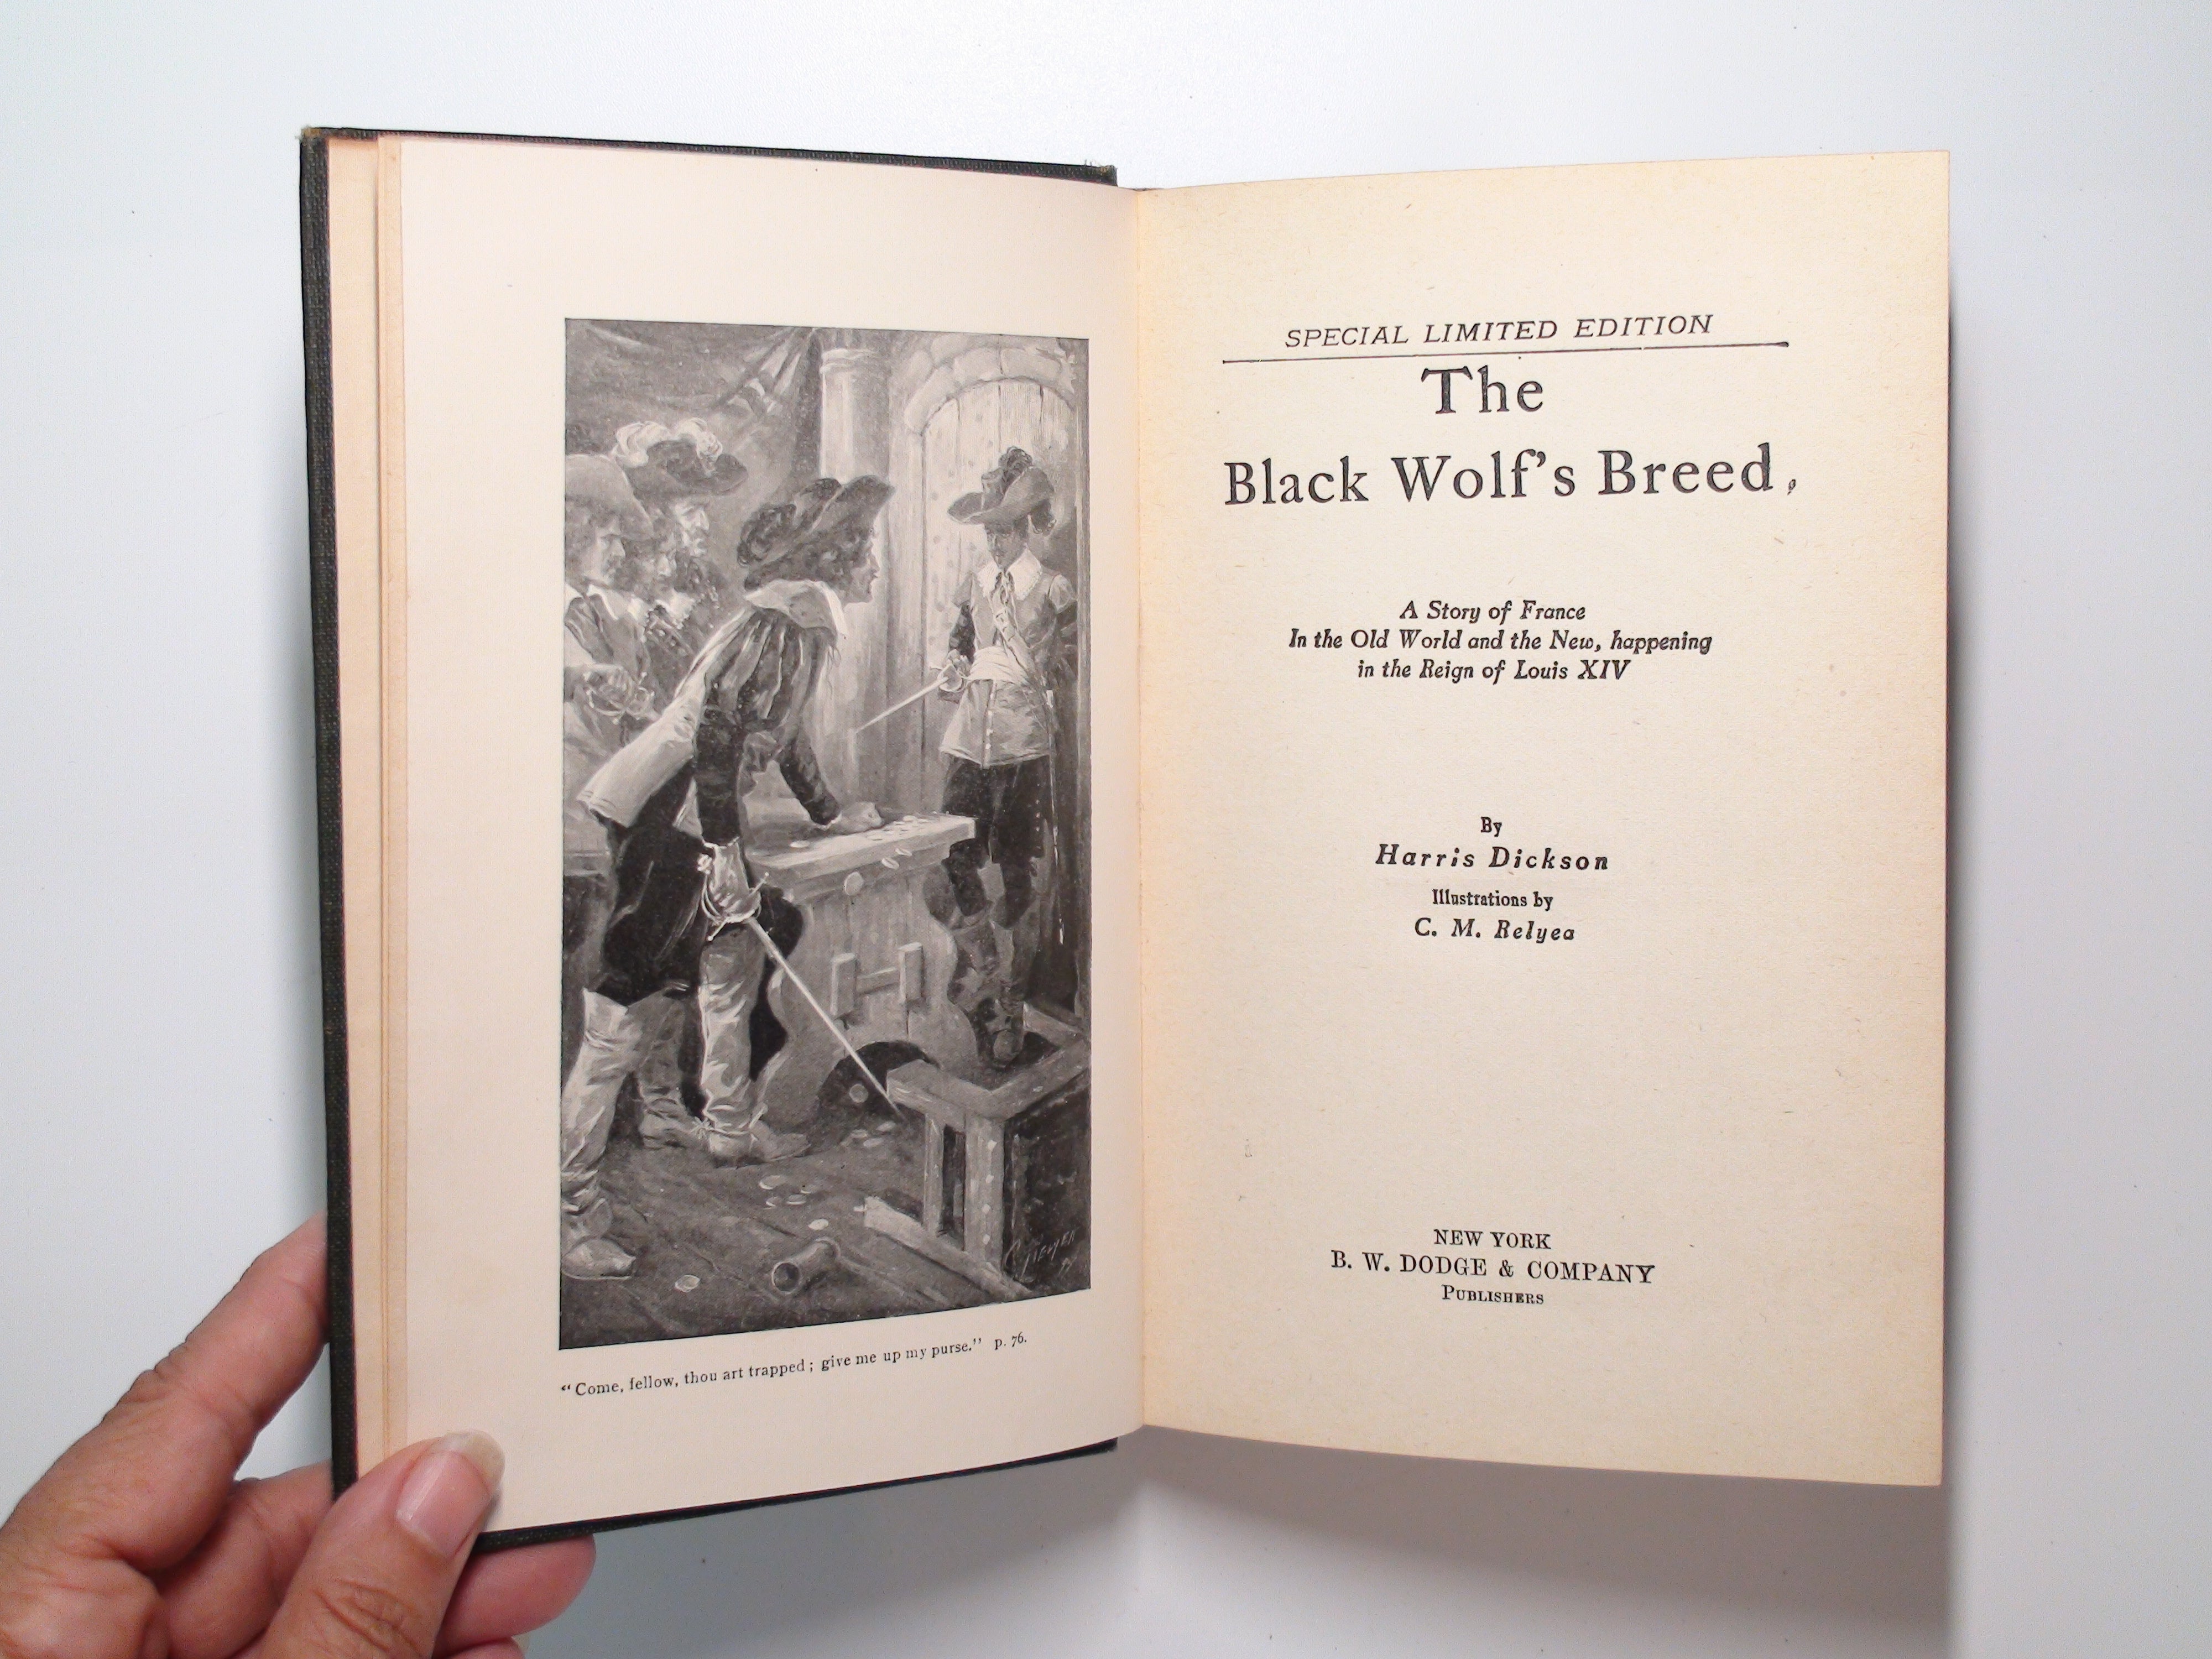 The Black Wolf's Breed by Harris Dickson, Illustrated by C. M. Relyea, 1899